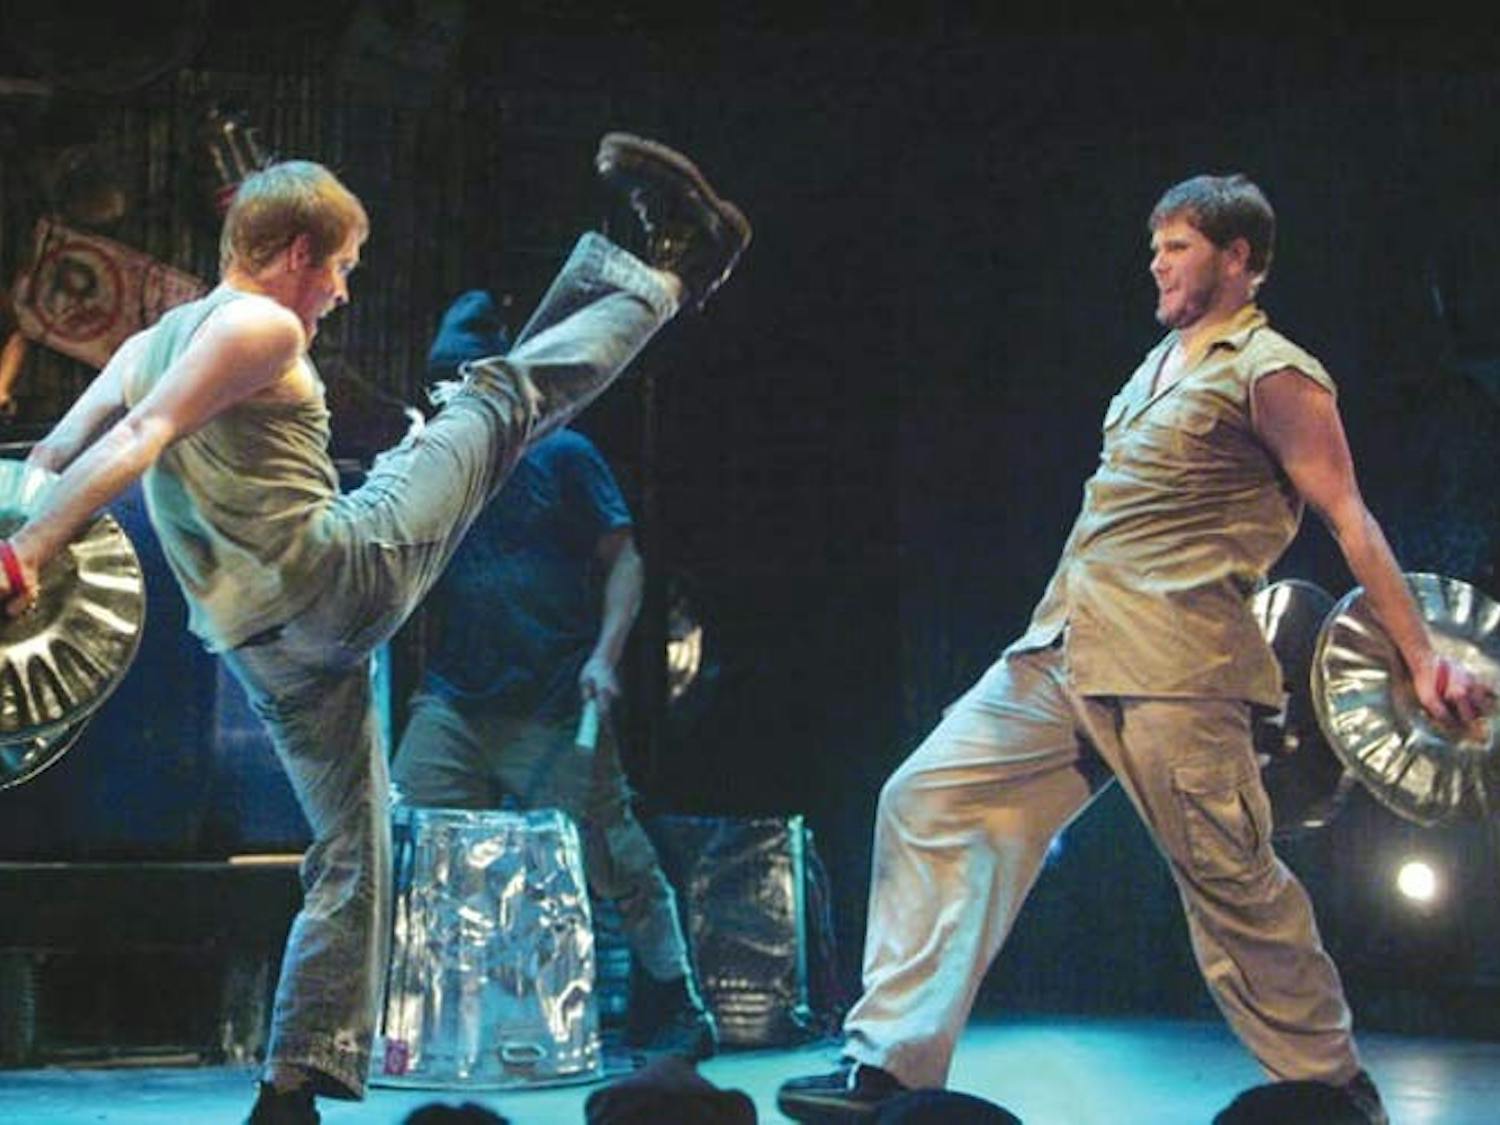 Sold-out STOMP is a smash hit, to perform again tonight  